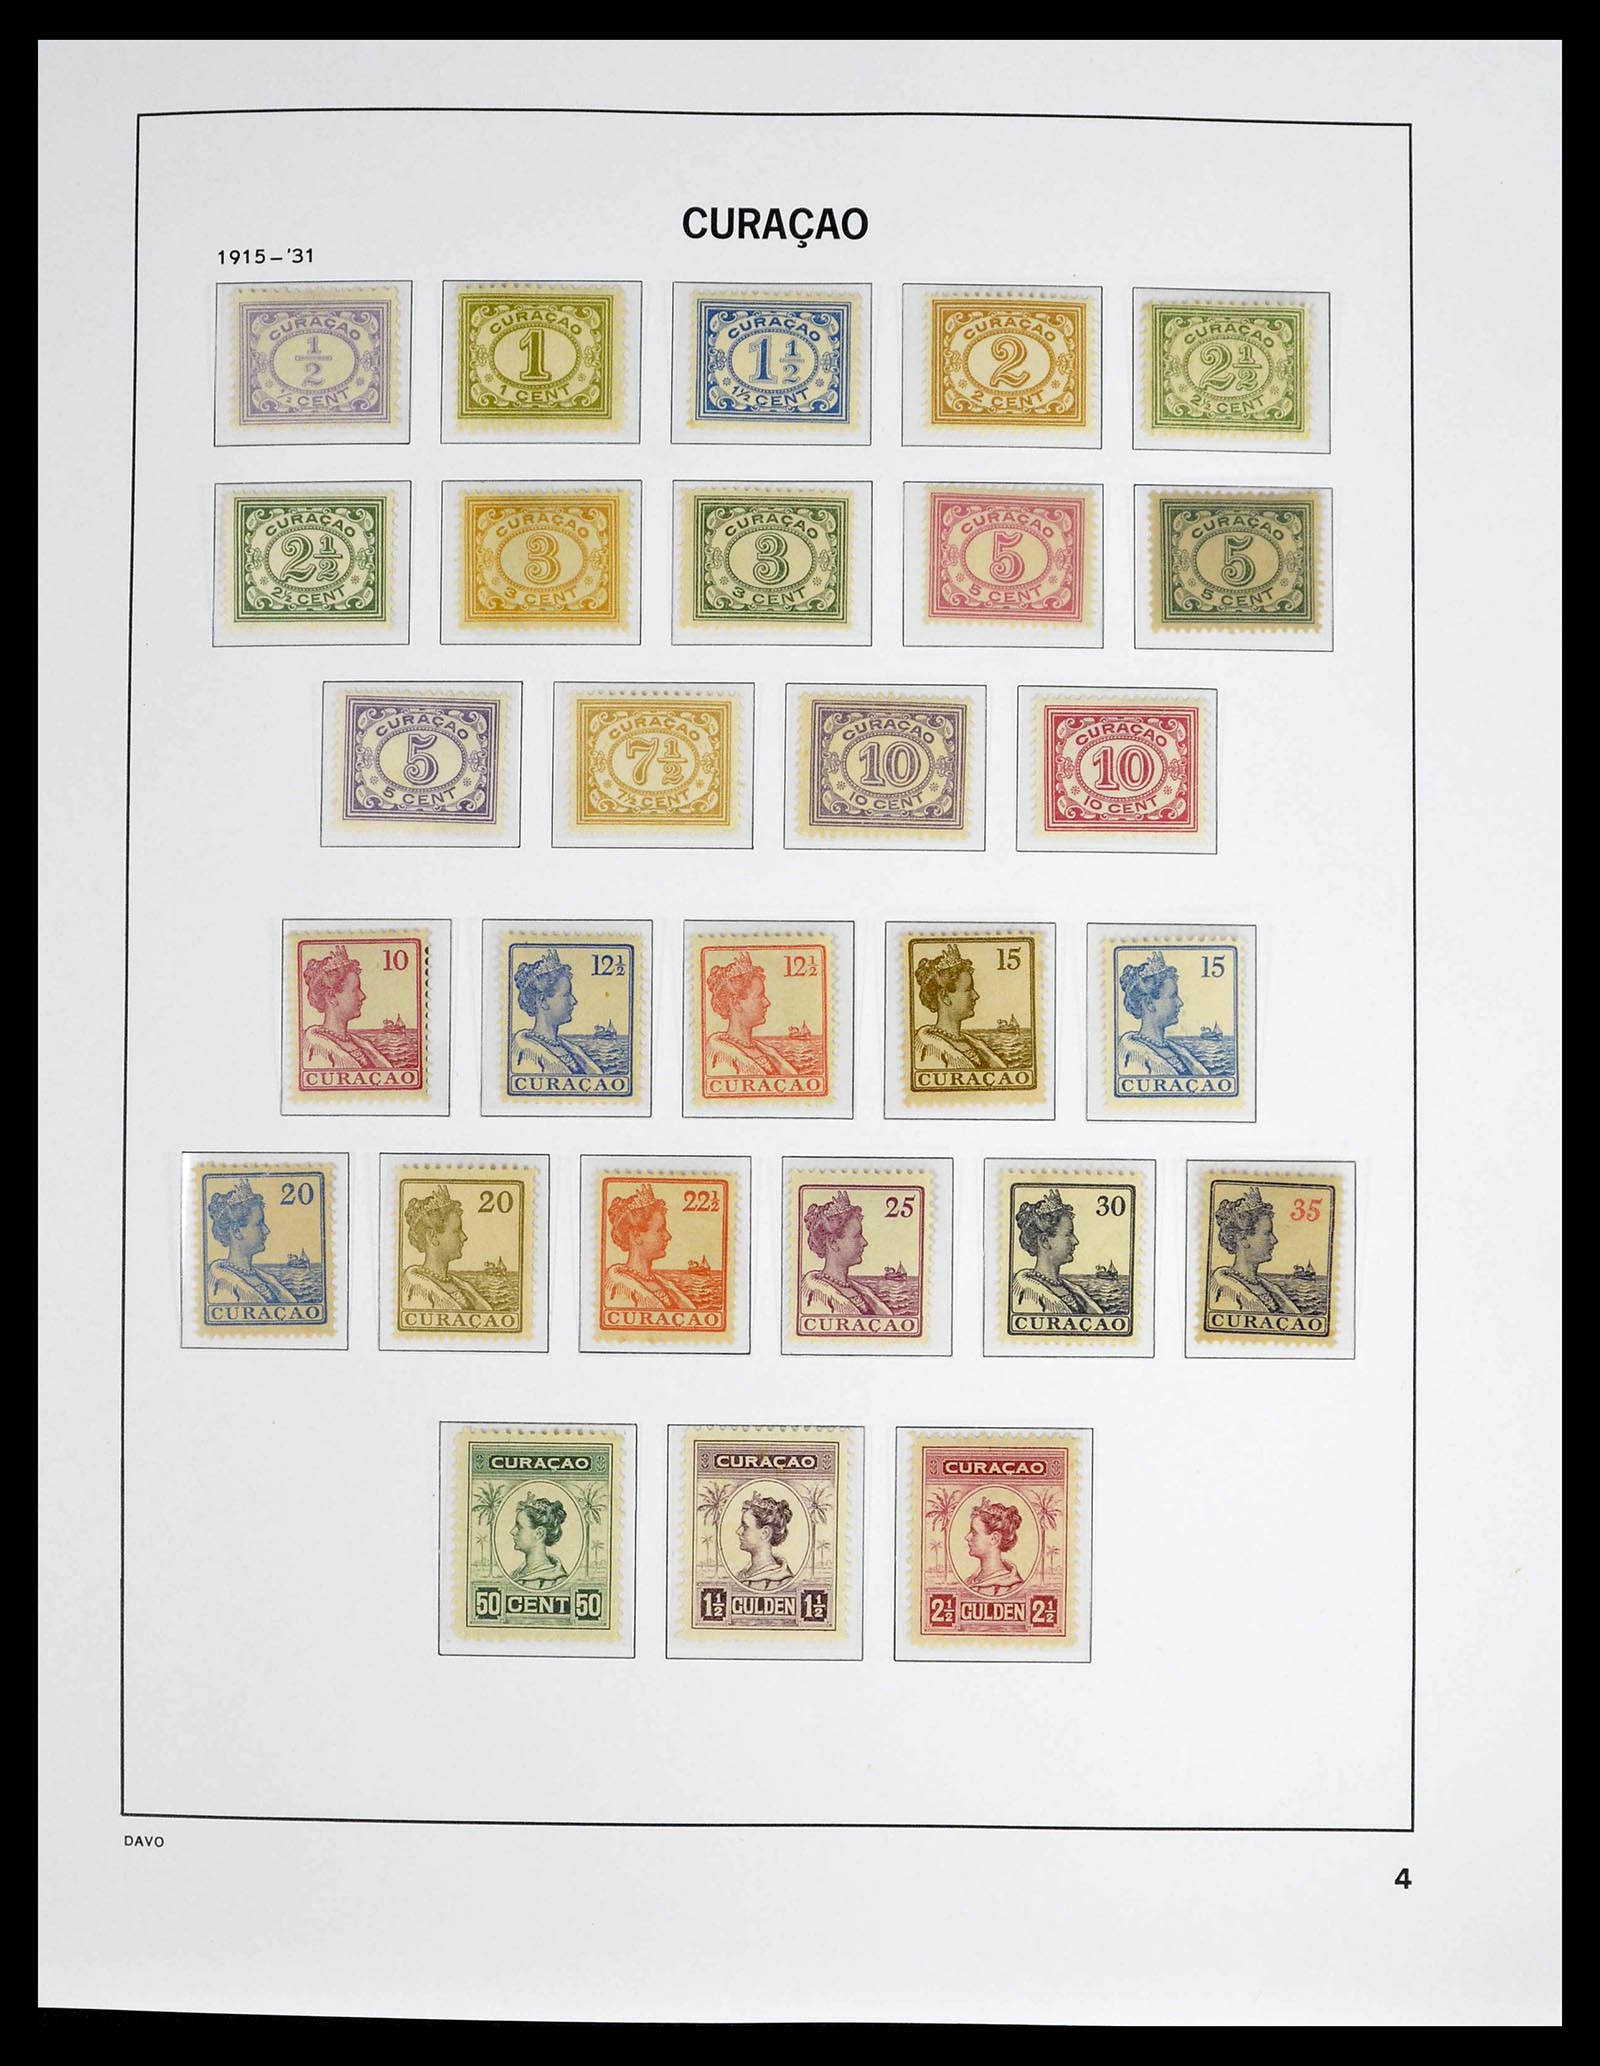 39360 0004 - Stamp collection 39360 Curaçao/Antilles complete 1873-2013.